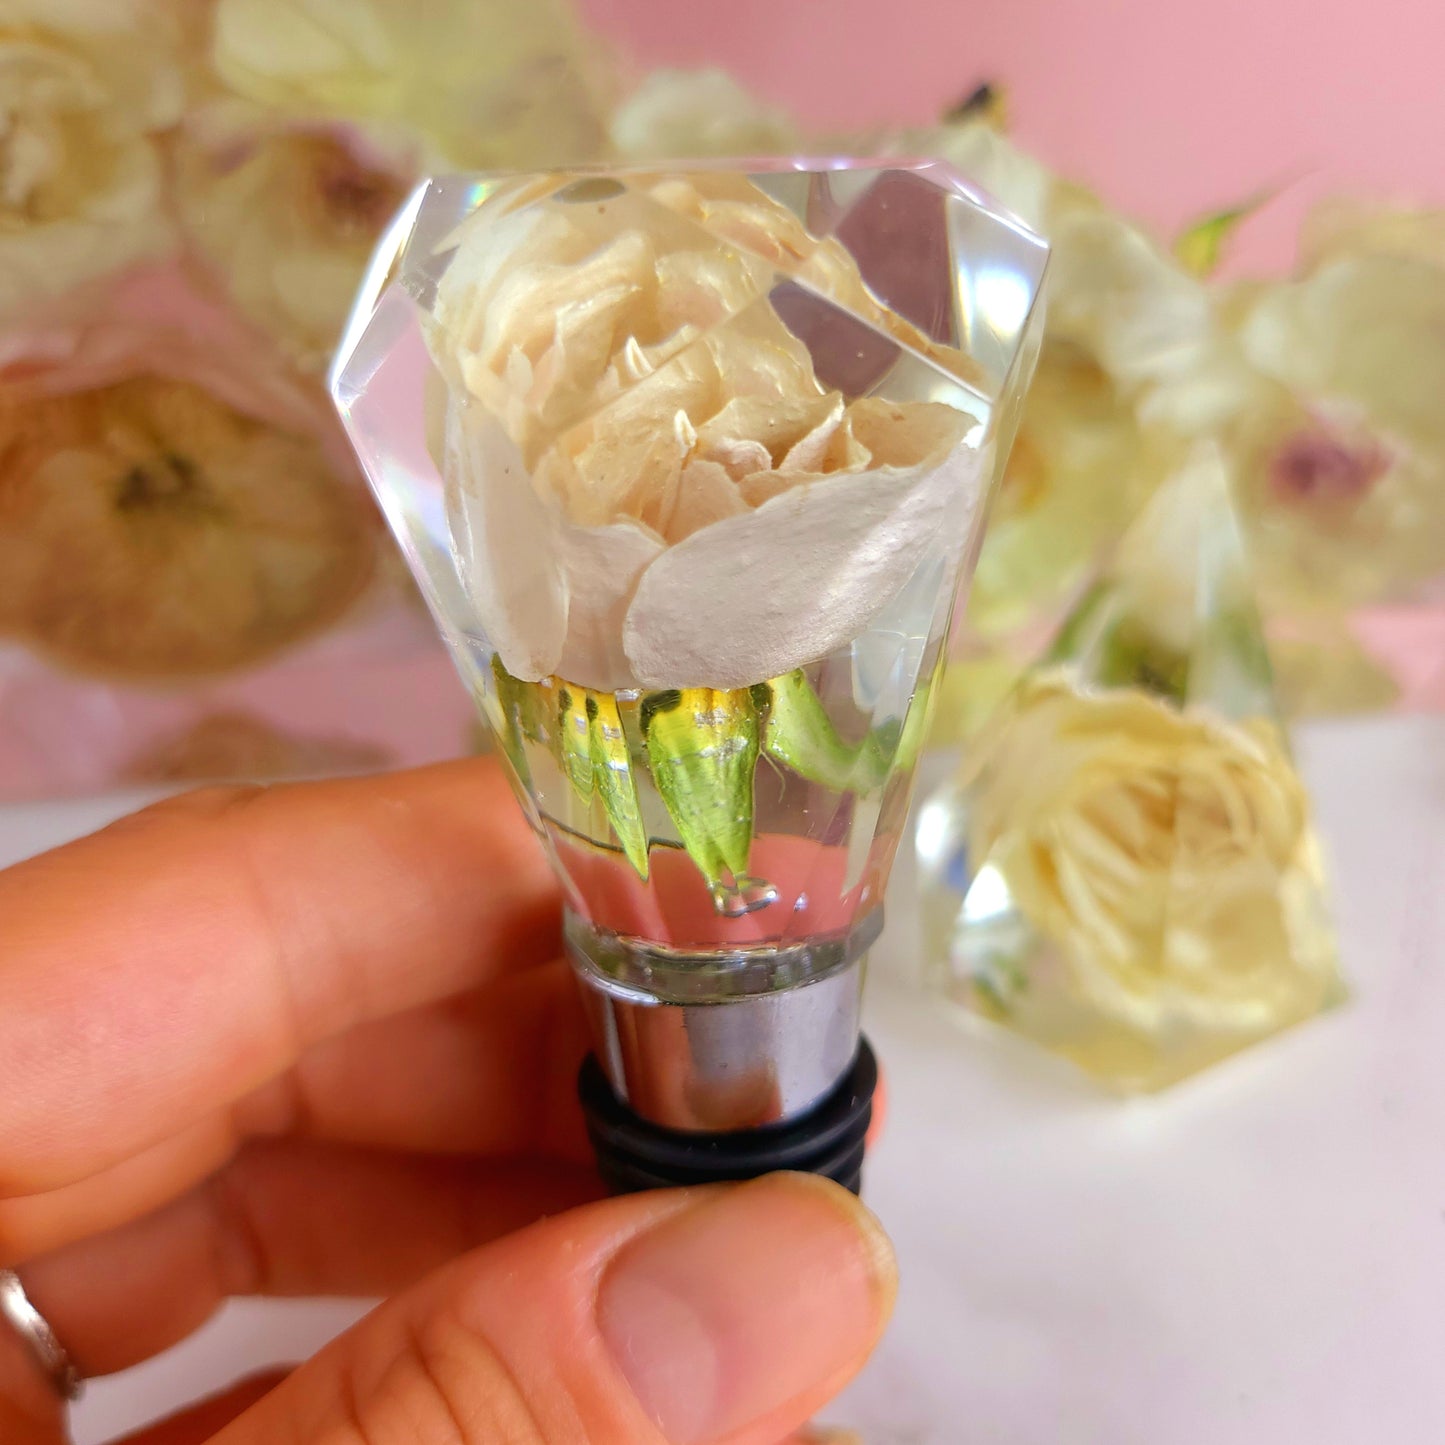 8"x 8" 3D Floral Resin Cube Wedding Bouquet Preservation Modern Fried Flowers Square Save Your Gift Keepsake - flofloflowery